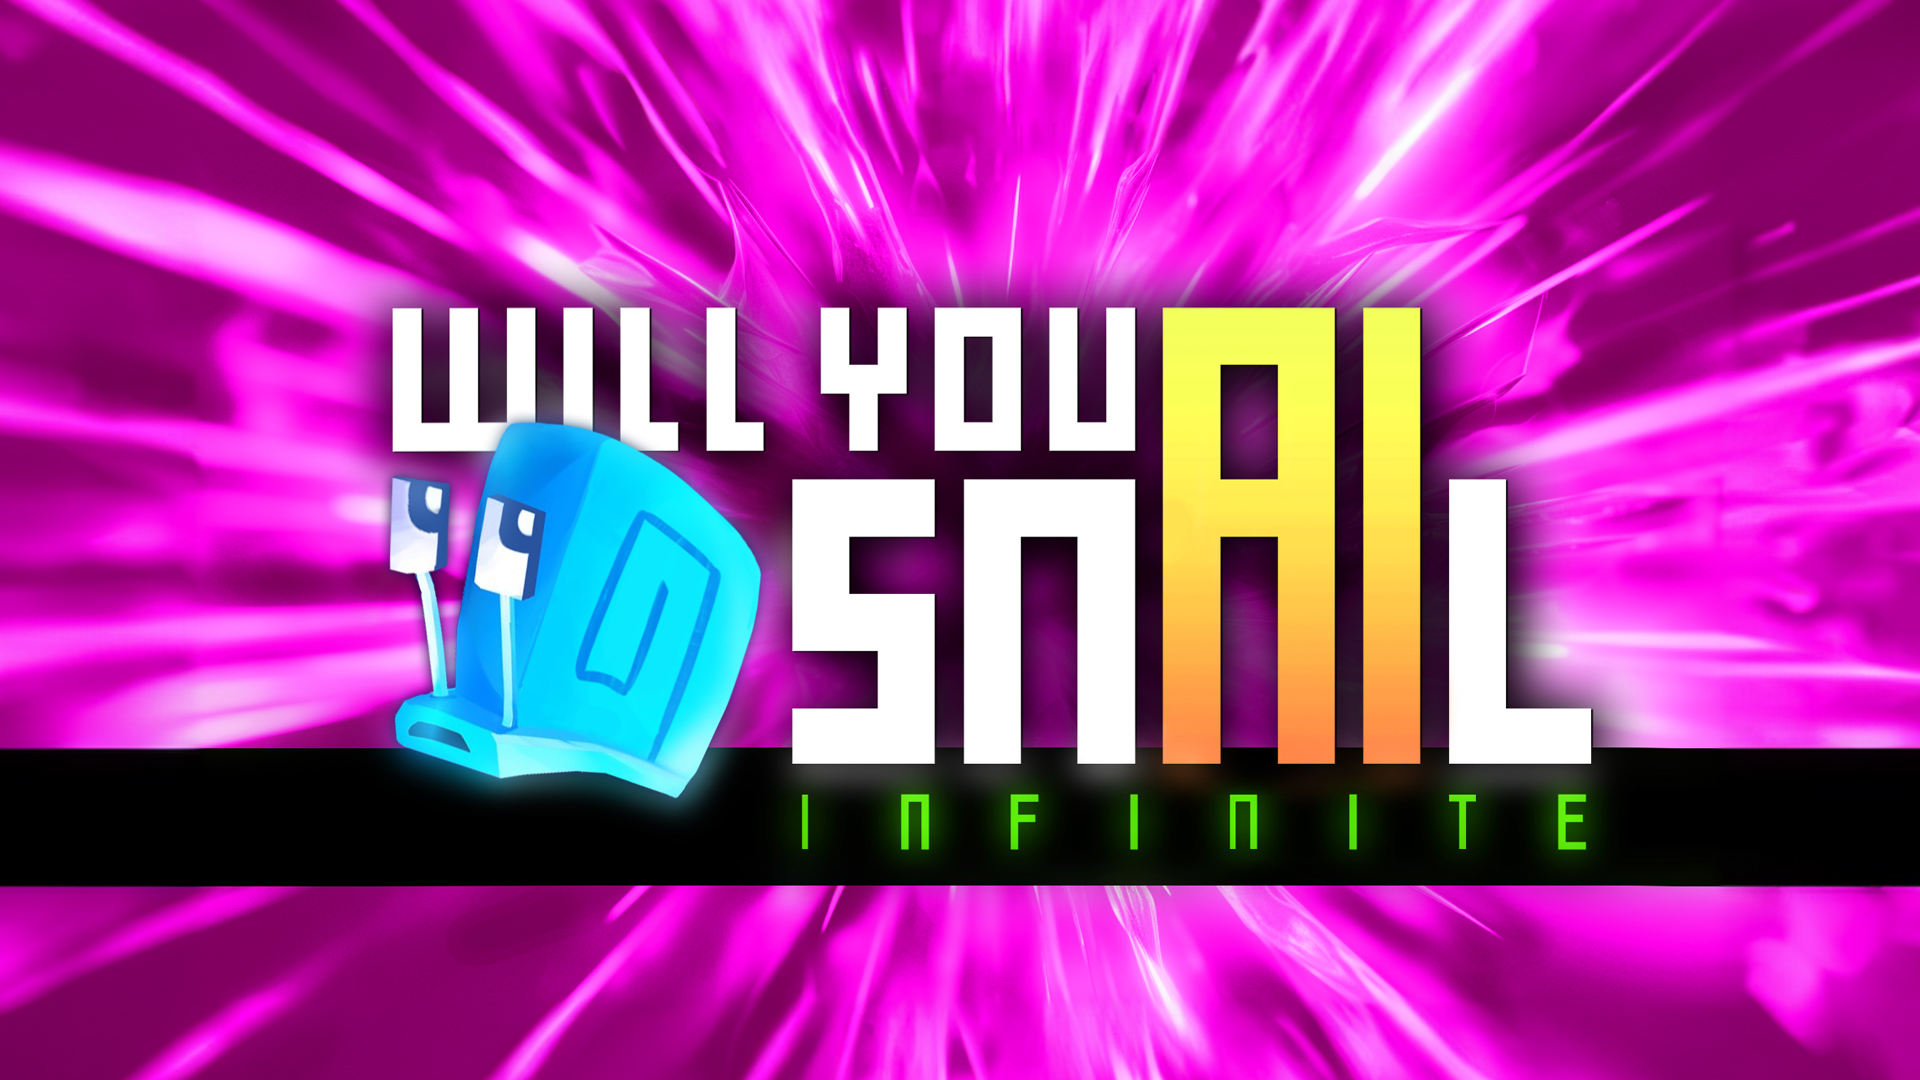 Will You Snail Infinite